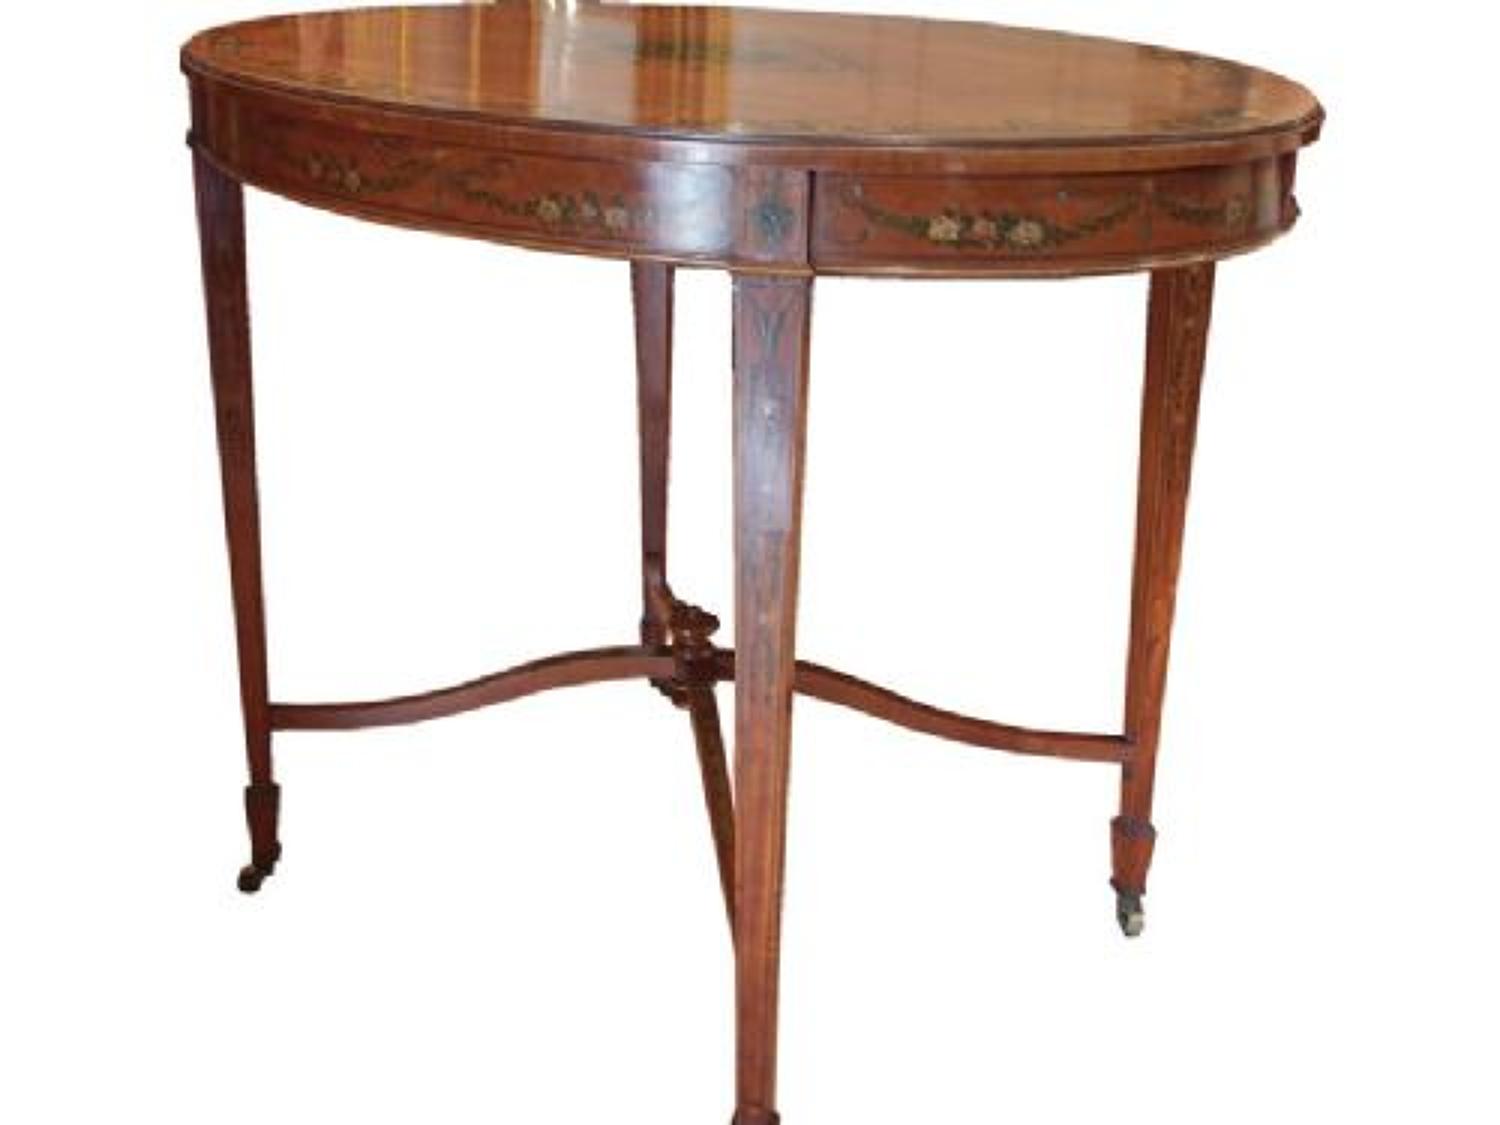 Sheraton revival inlaid Center Table